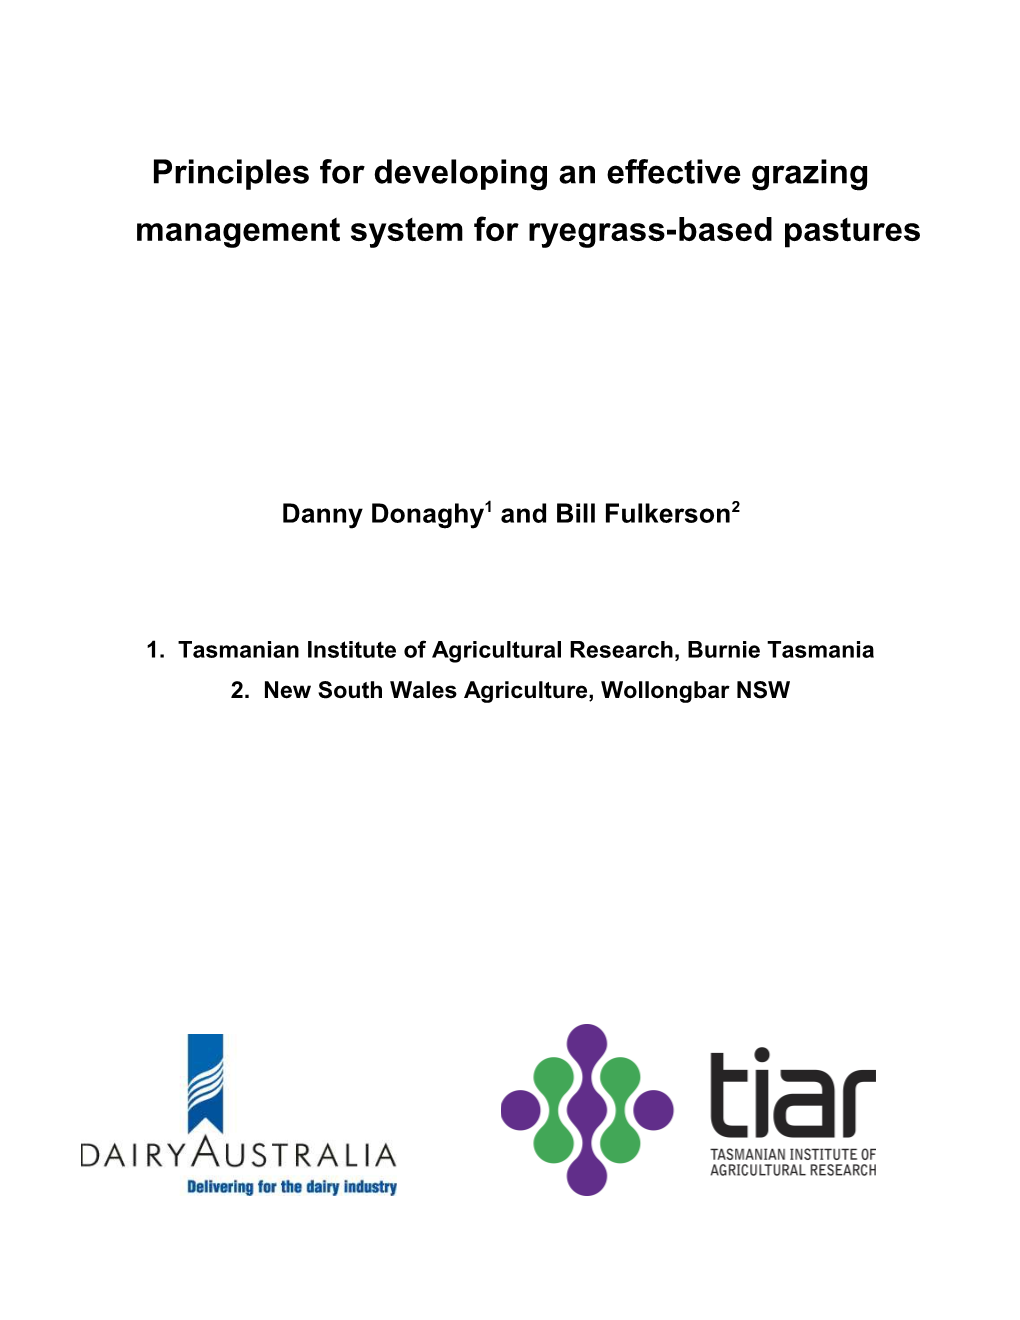 Principles for Developing an Effective Management System for Ryegrass Based Pastures